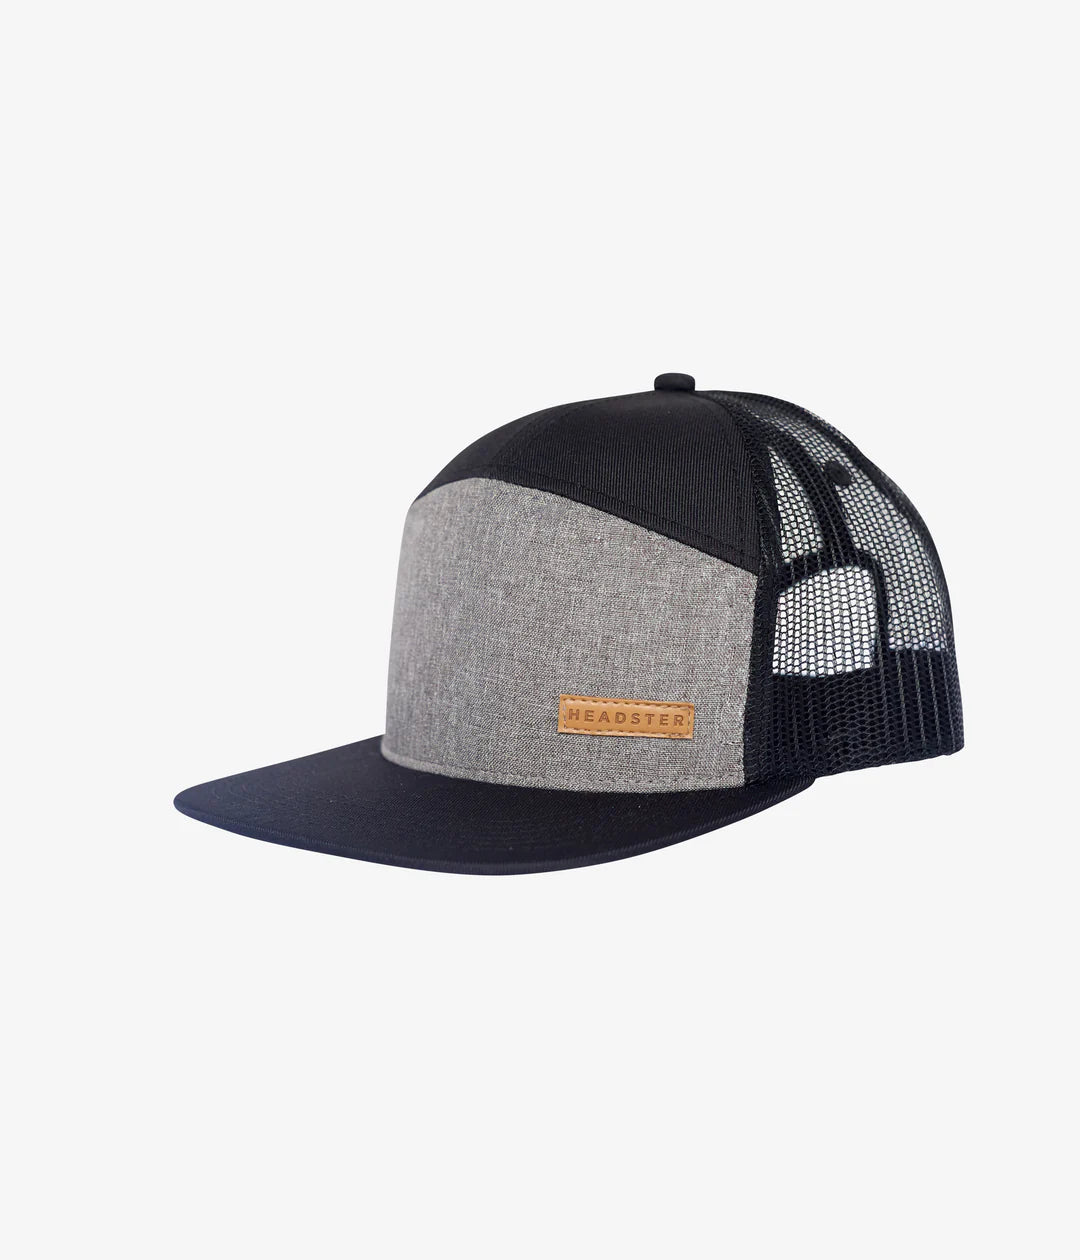 Headsters Hats - City-Grey